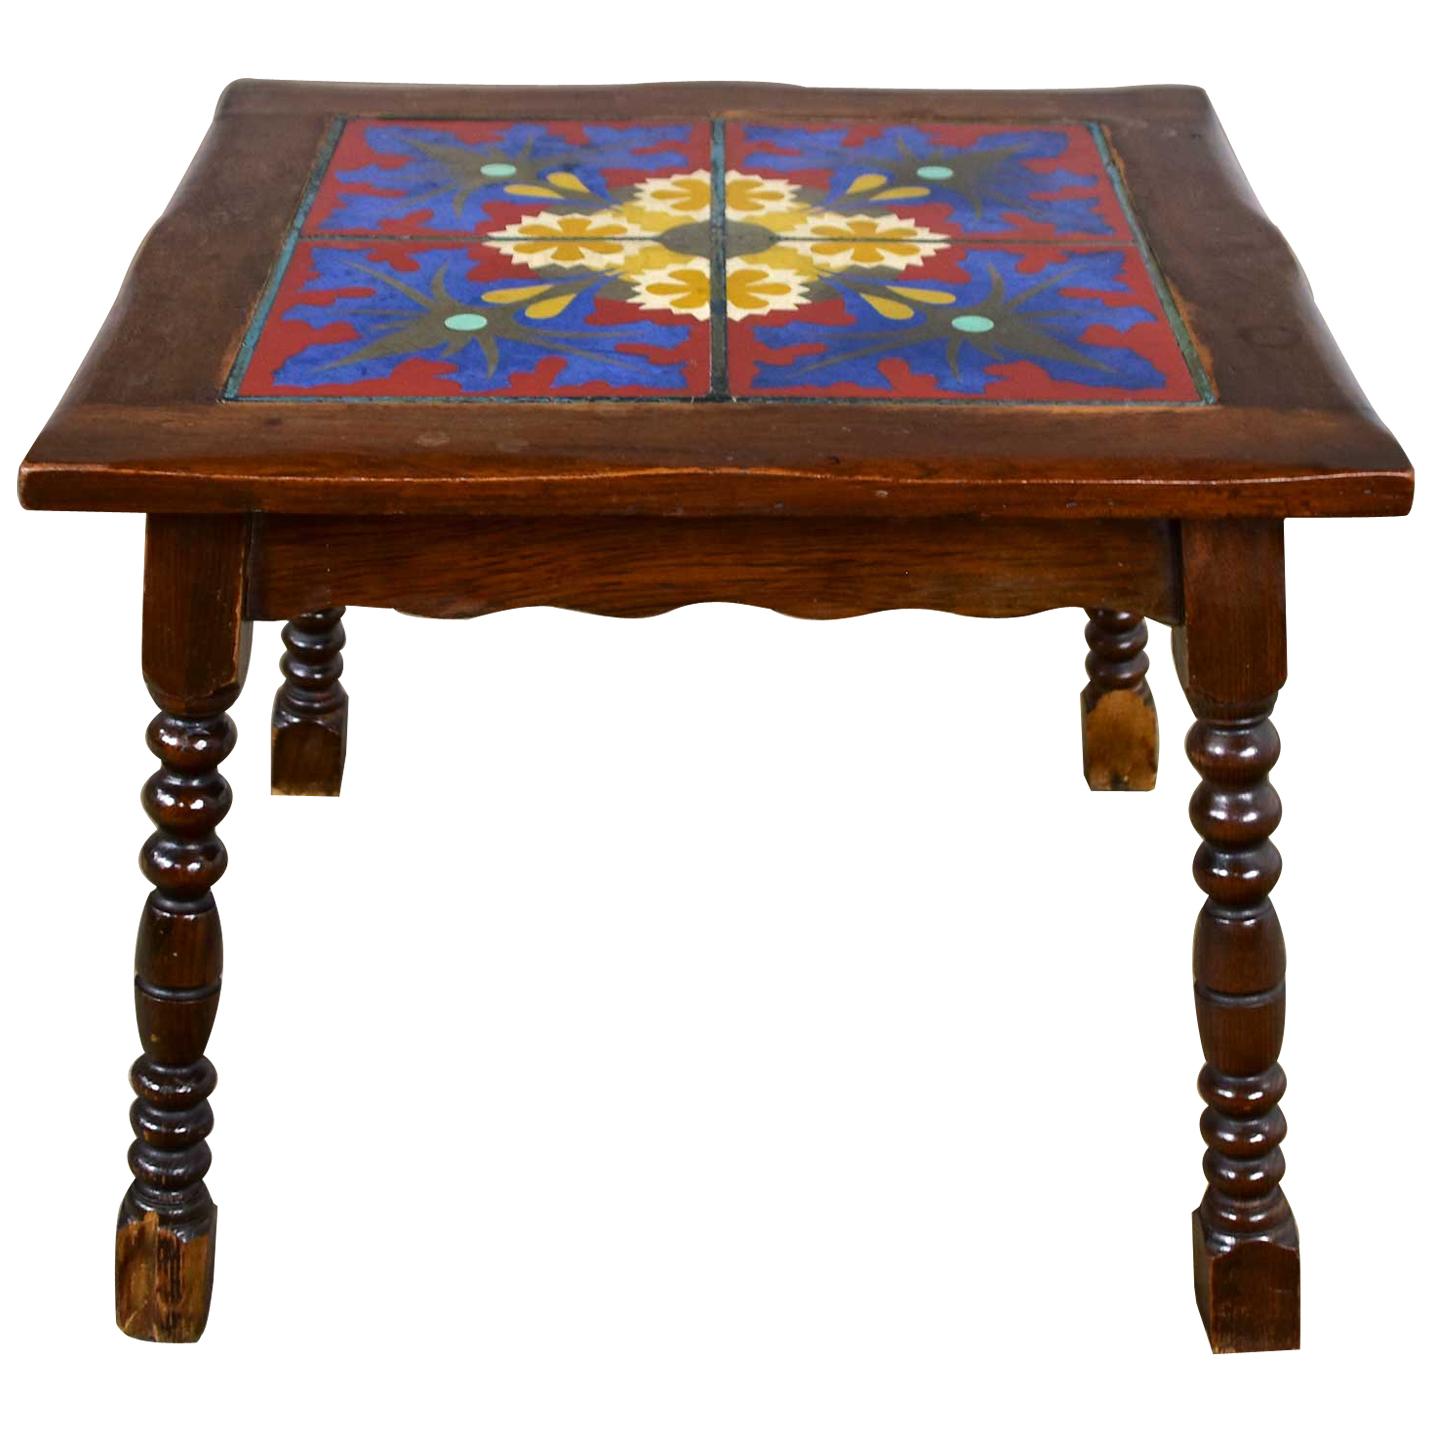 Catalina California or Mission Arts & Crafts Style Spanish Tile Top Side Table For Sale